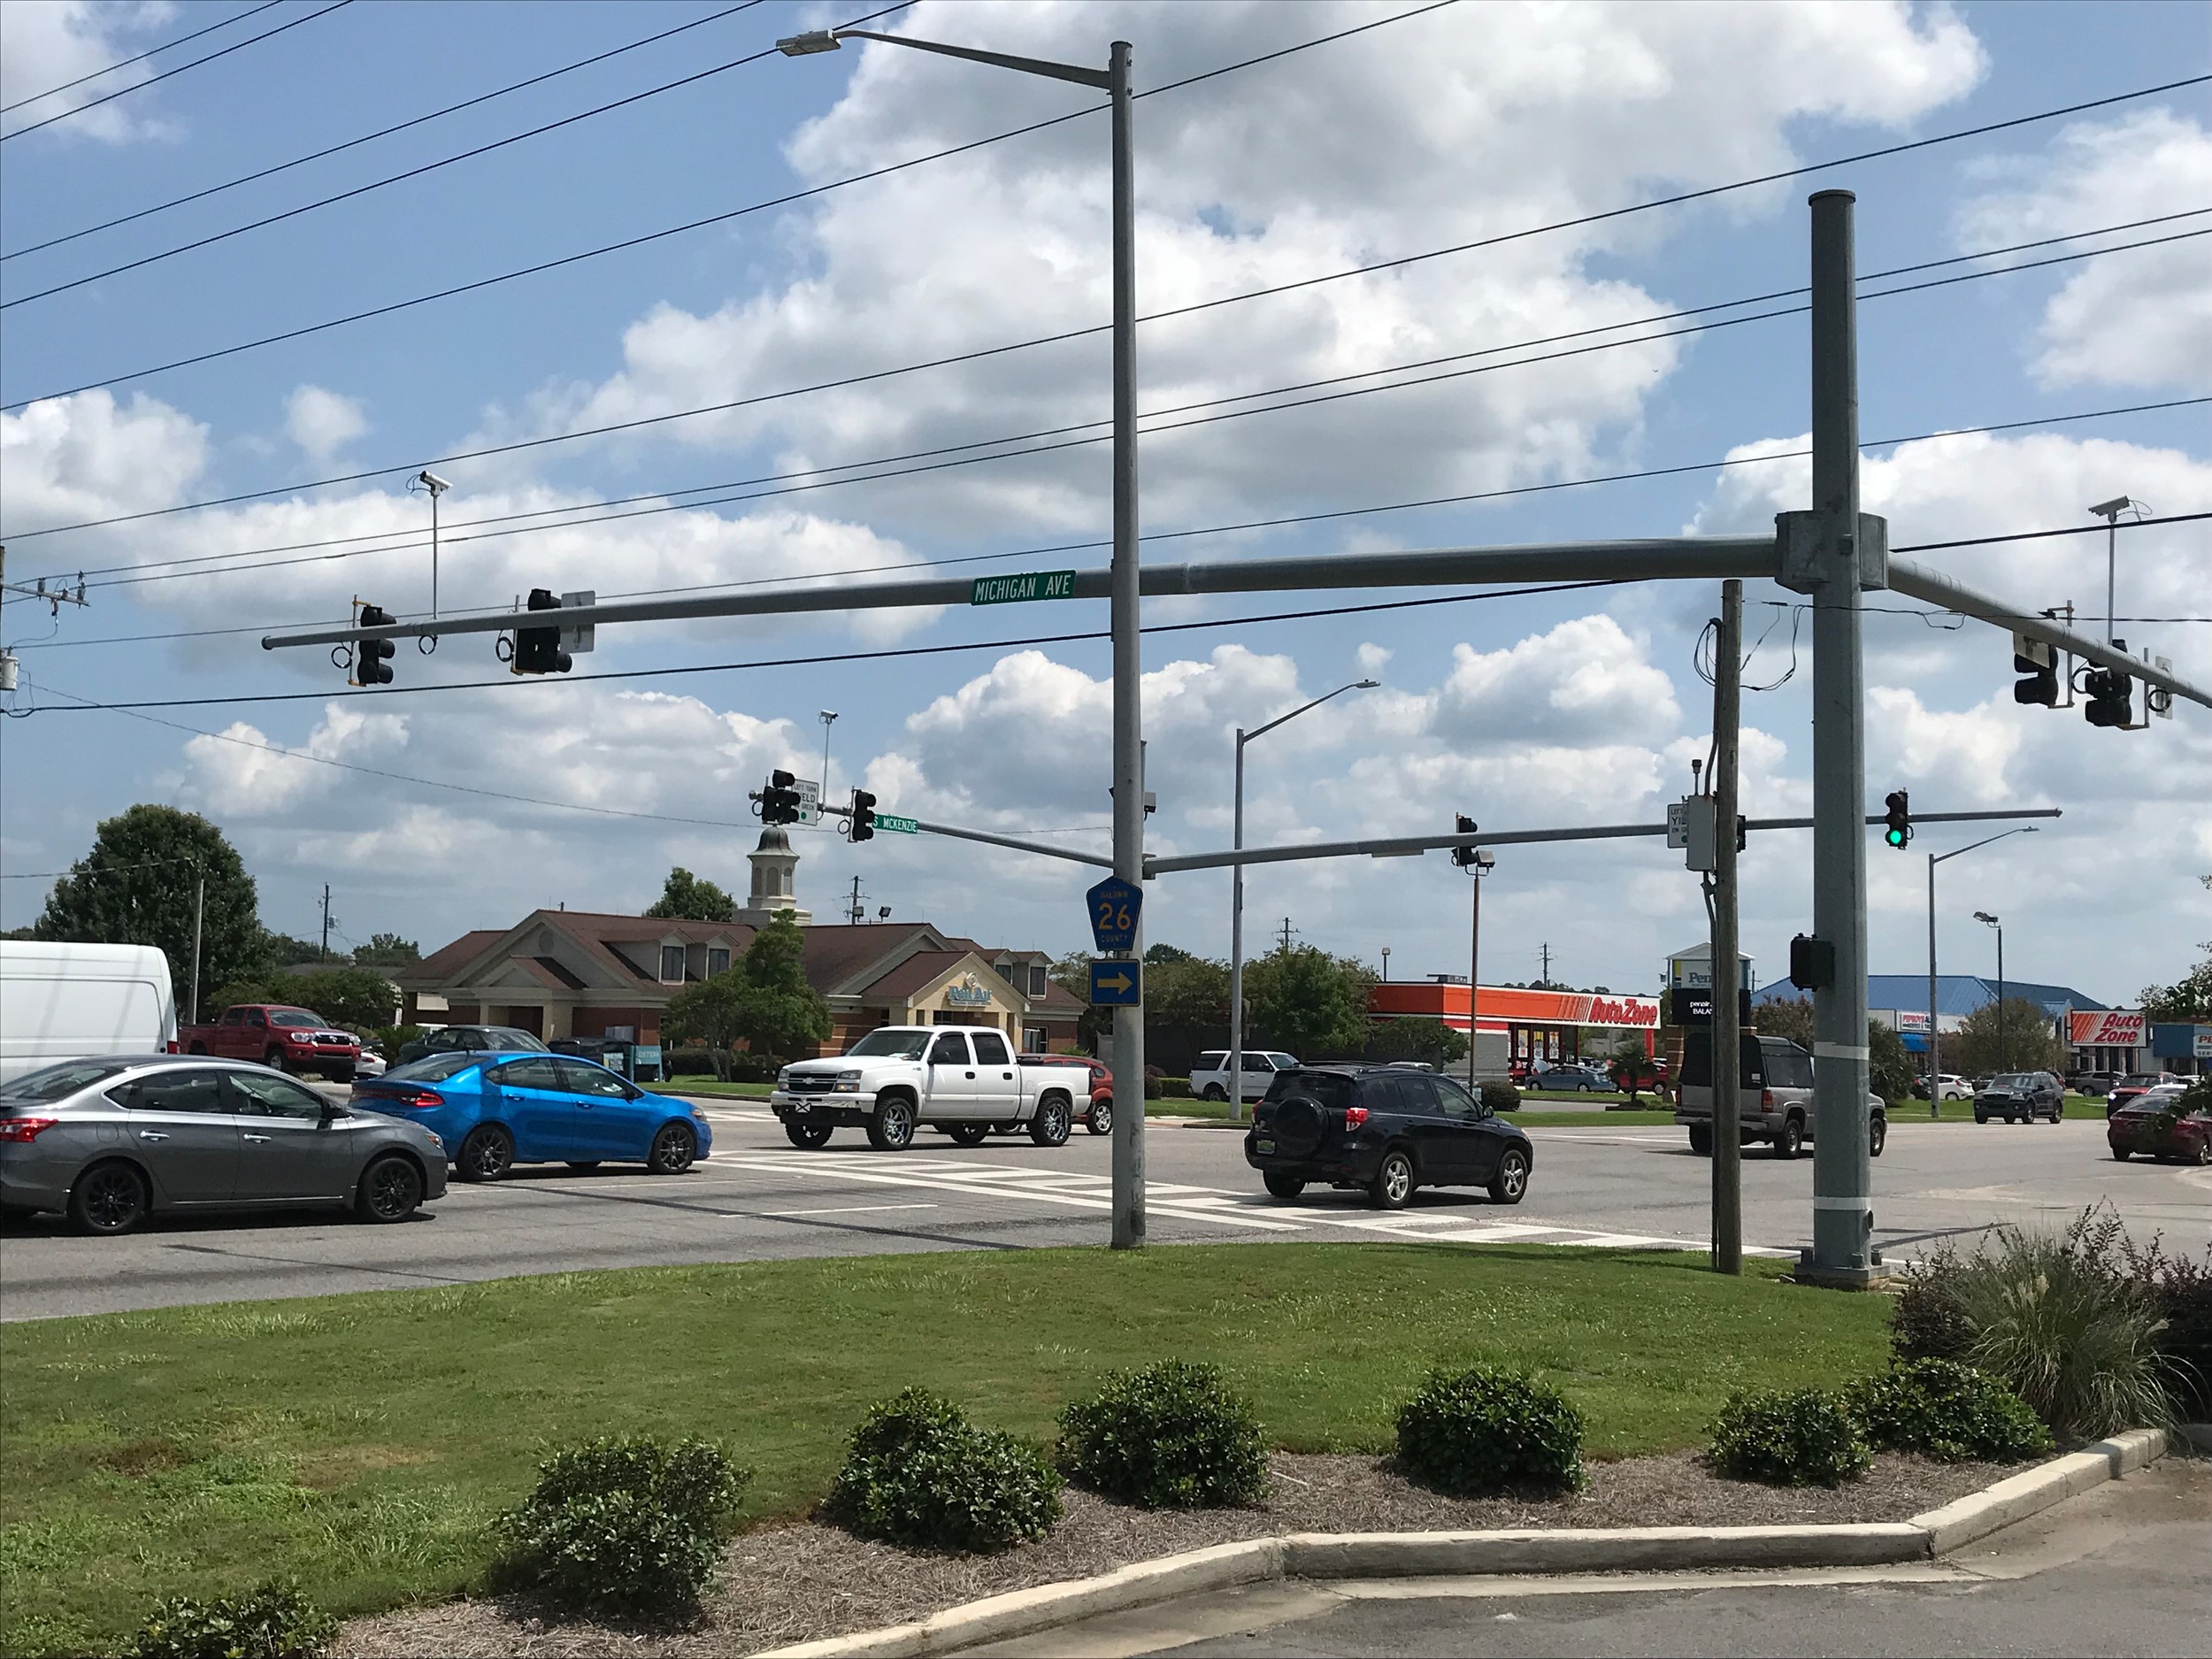 The intersection at Highway 59 and Michigan Avenue, one of the proposed intersections for the implementation of the new traffic signal preemption system from the Foley Fire Department.